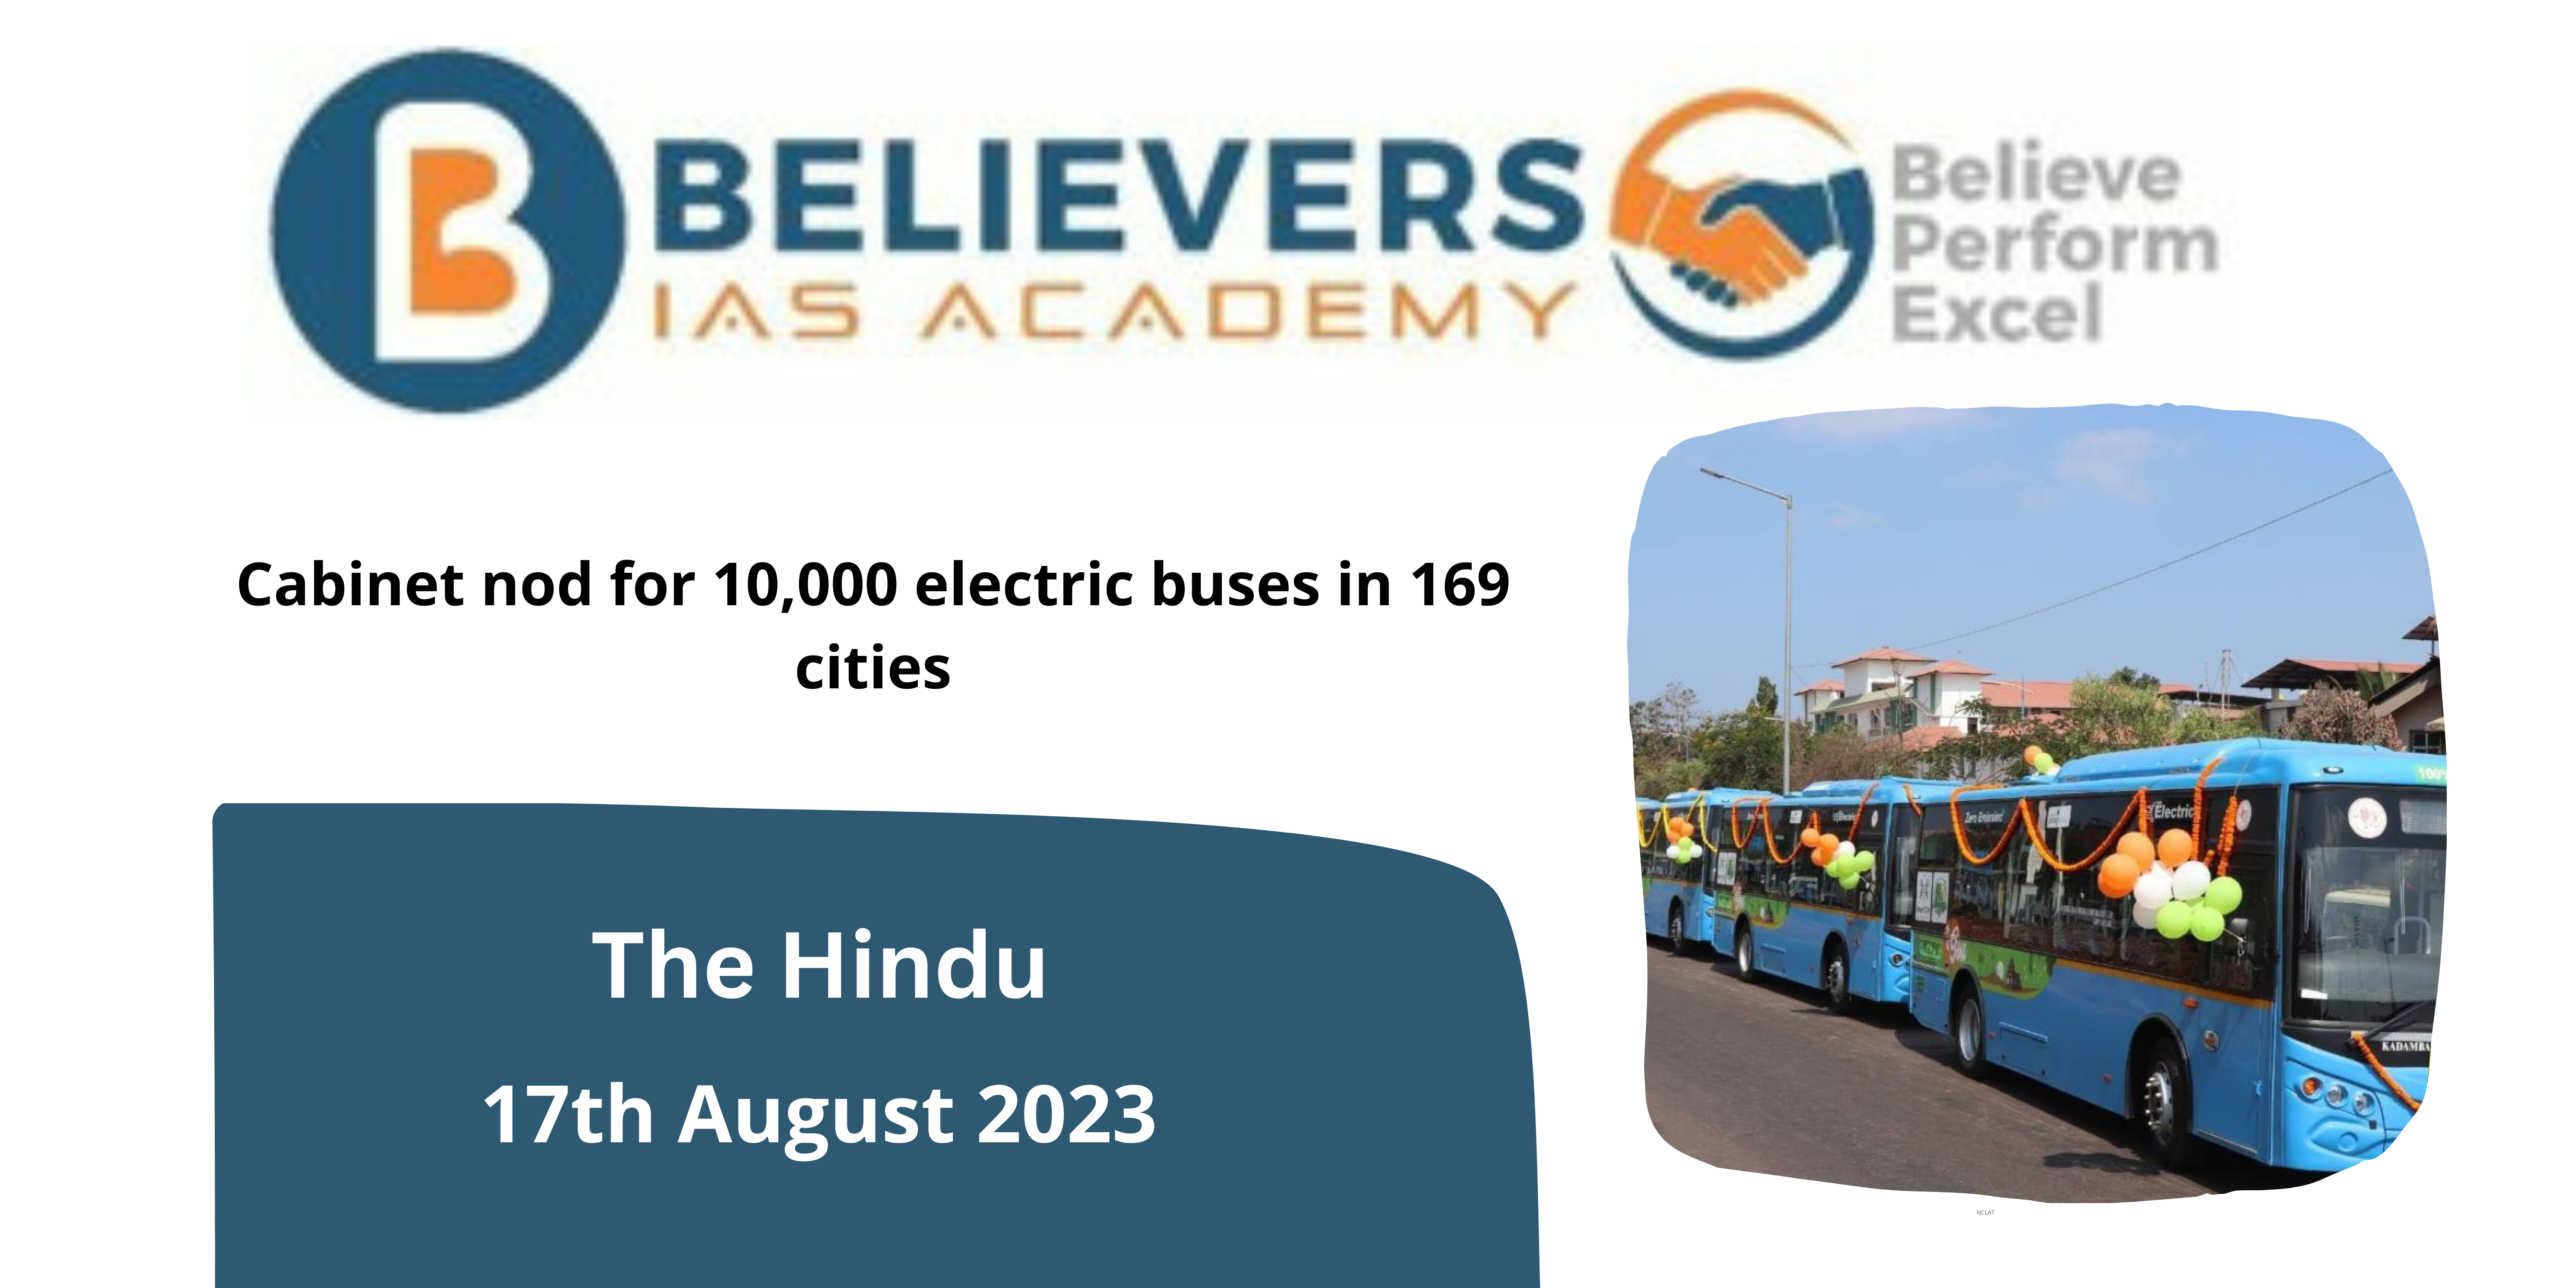 Cabinet nod for 10,000 electric buses in 169 cities